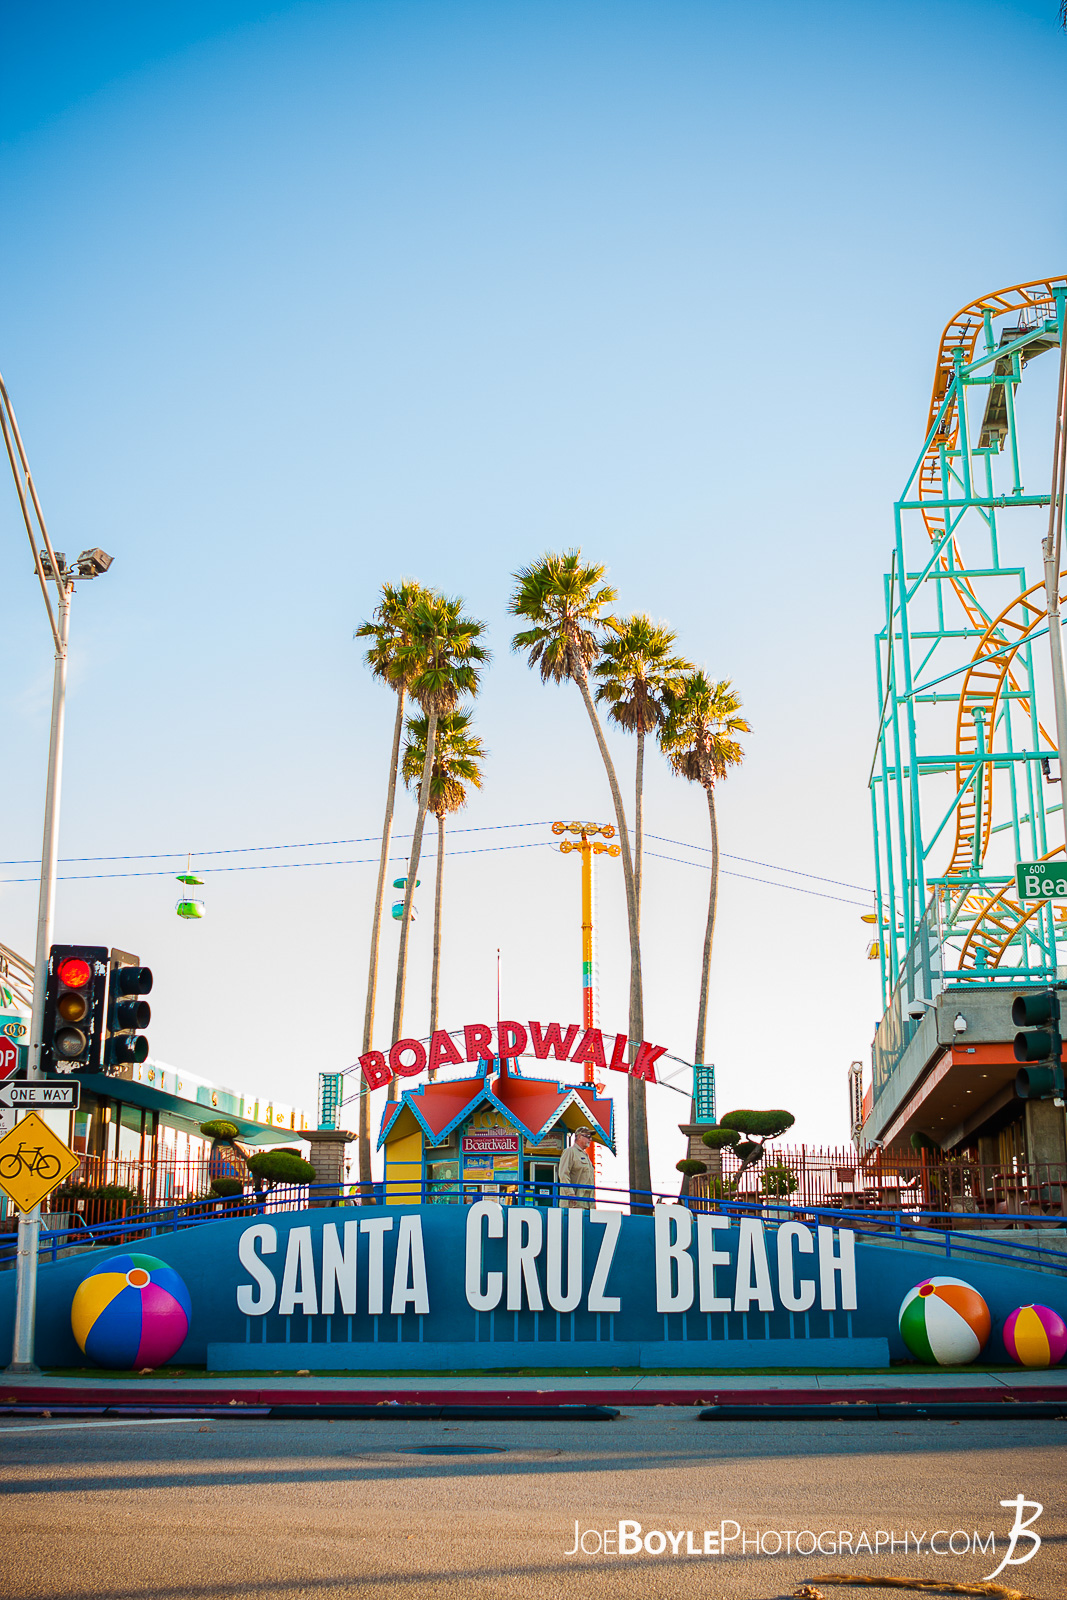  While visiting a friend in California we stopped over at Santa Cruz to visit the Beach and Boardwalk. The park was closed but it was still fun to visit and walk around. I didn't know that it was an amusement park with your typical carnival games, roller coasters, food, etc. Maybe I'll visit it if I go back, but to be honest Cedar Point in Sandusky, Ohio has really spoiled me if I ever want to ride a roller coaster! 